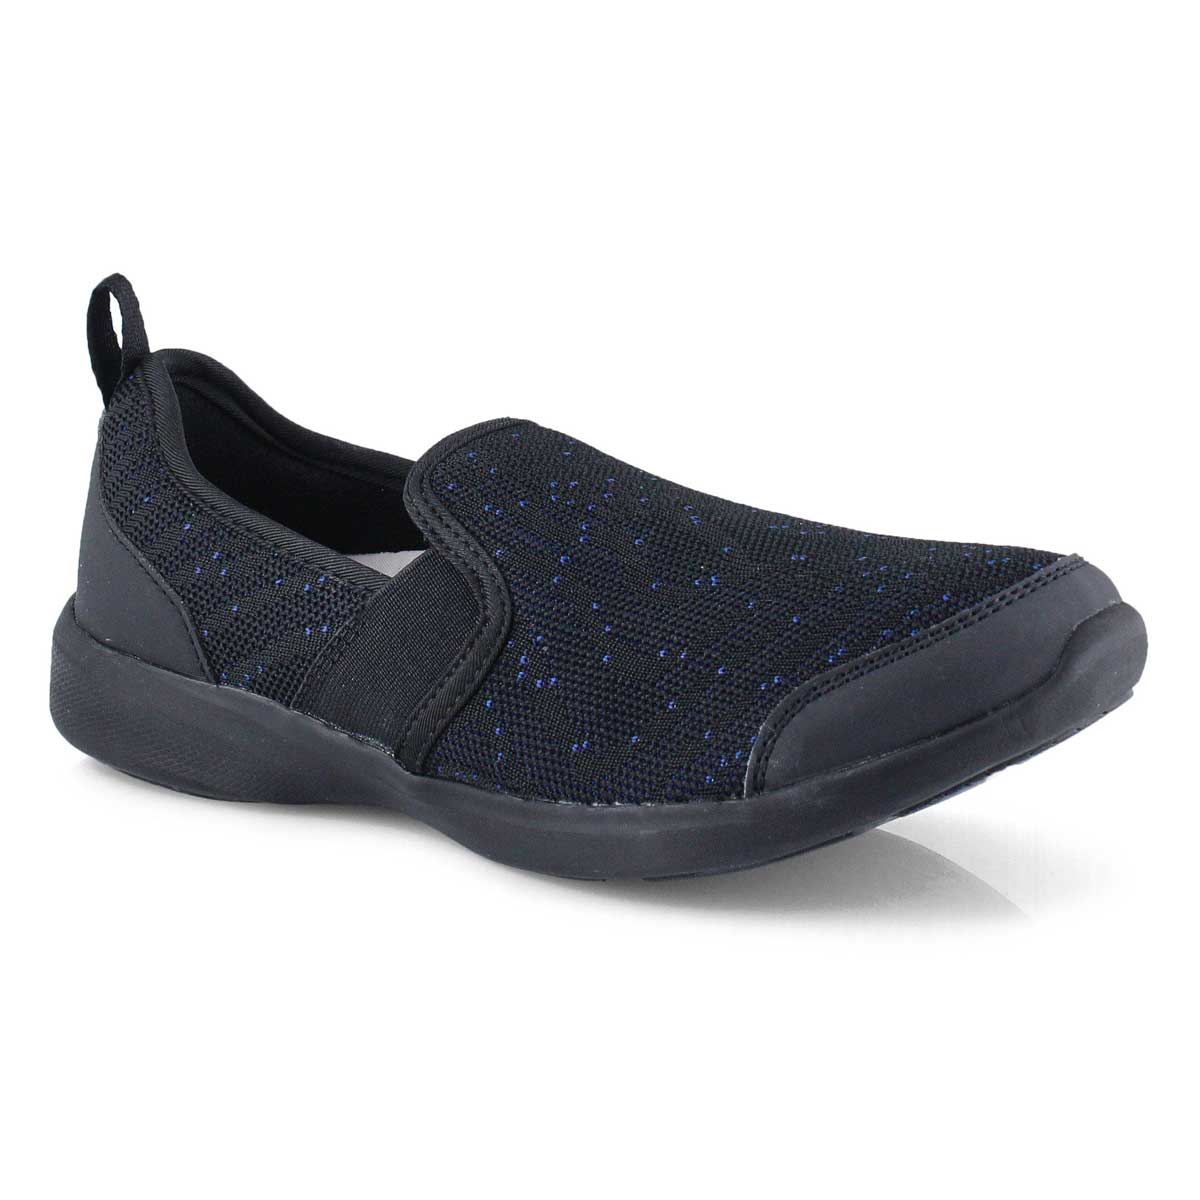 women's black slip on casual shoes